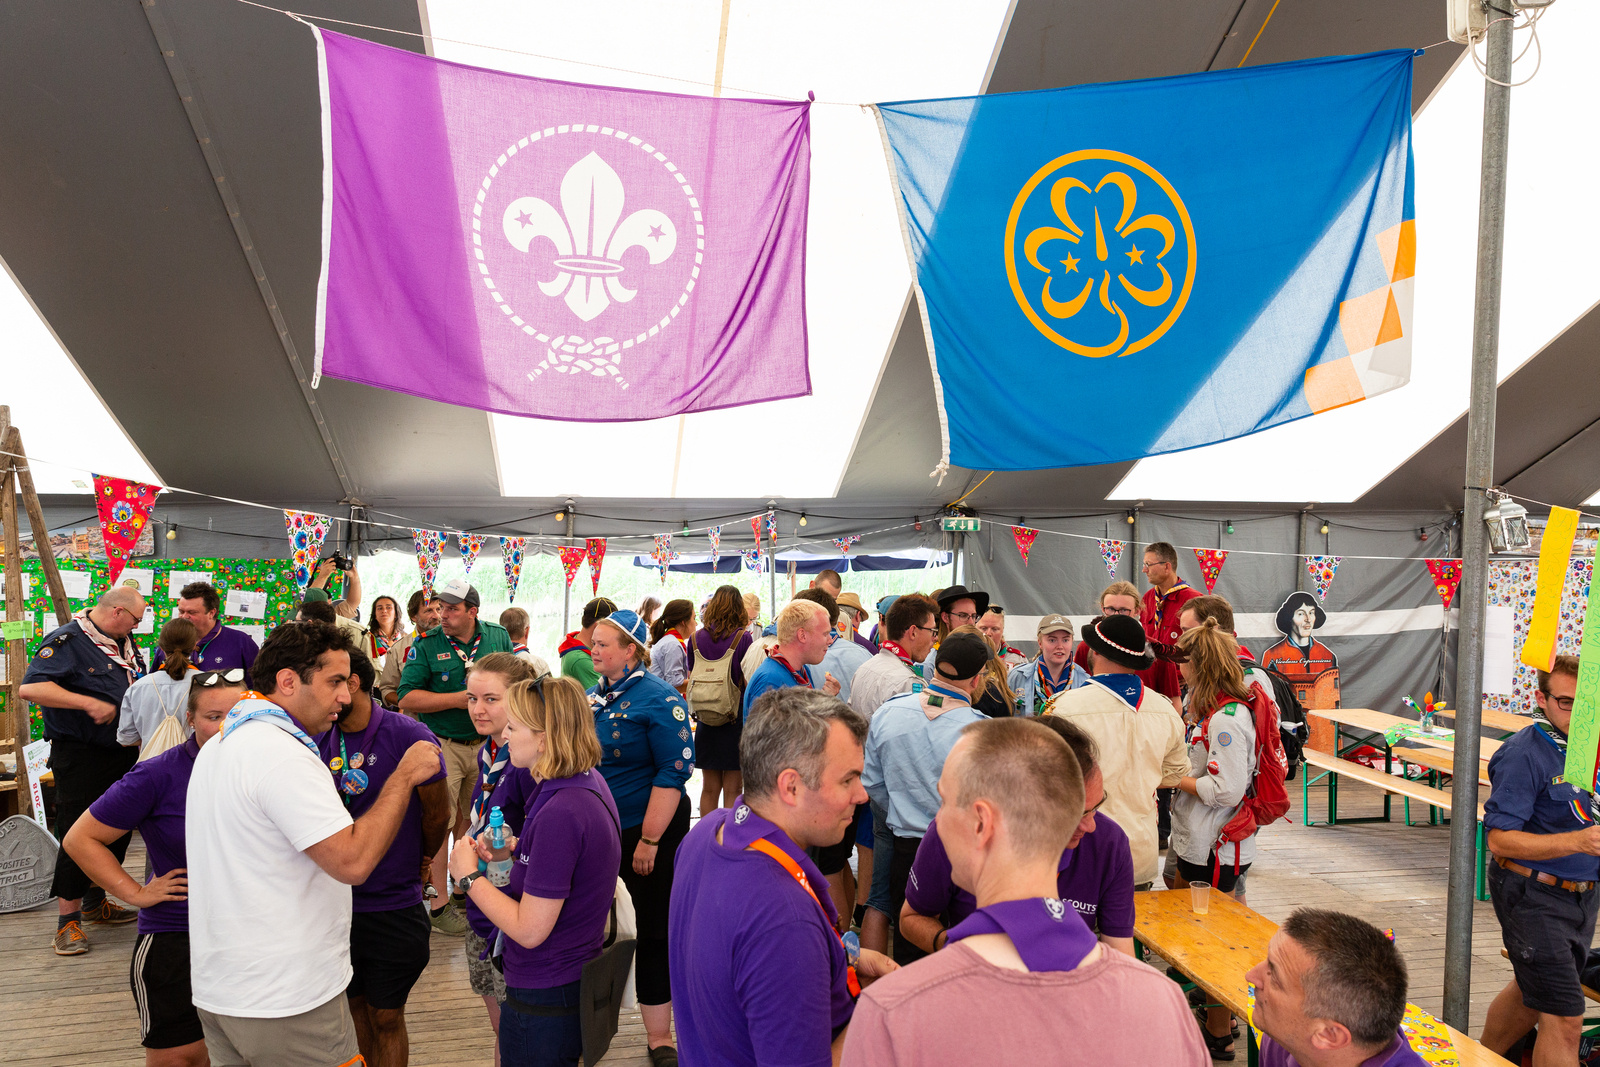 The Power of Teamwork: WAGGGS and WOSM for Roverway